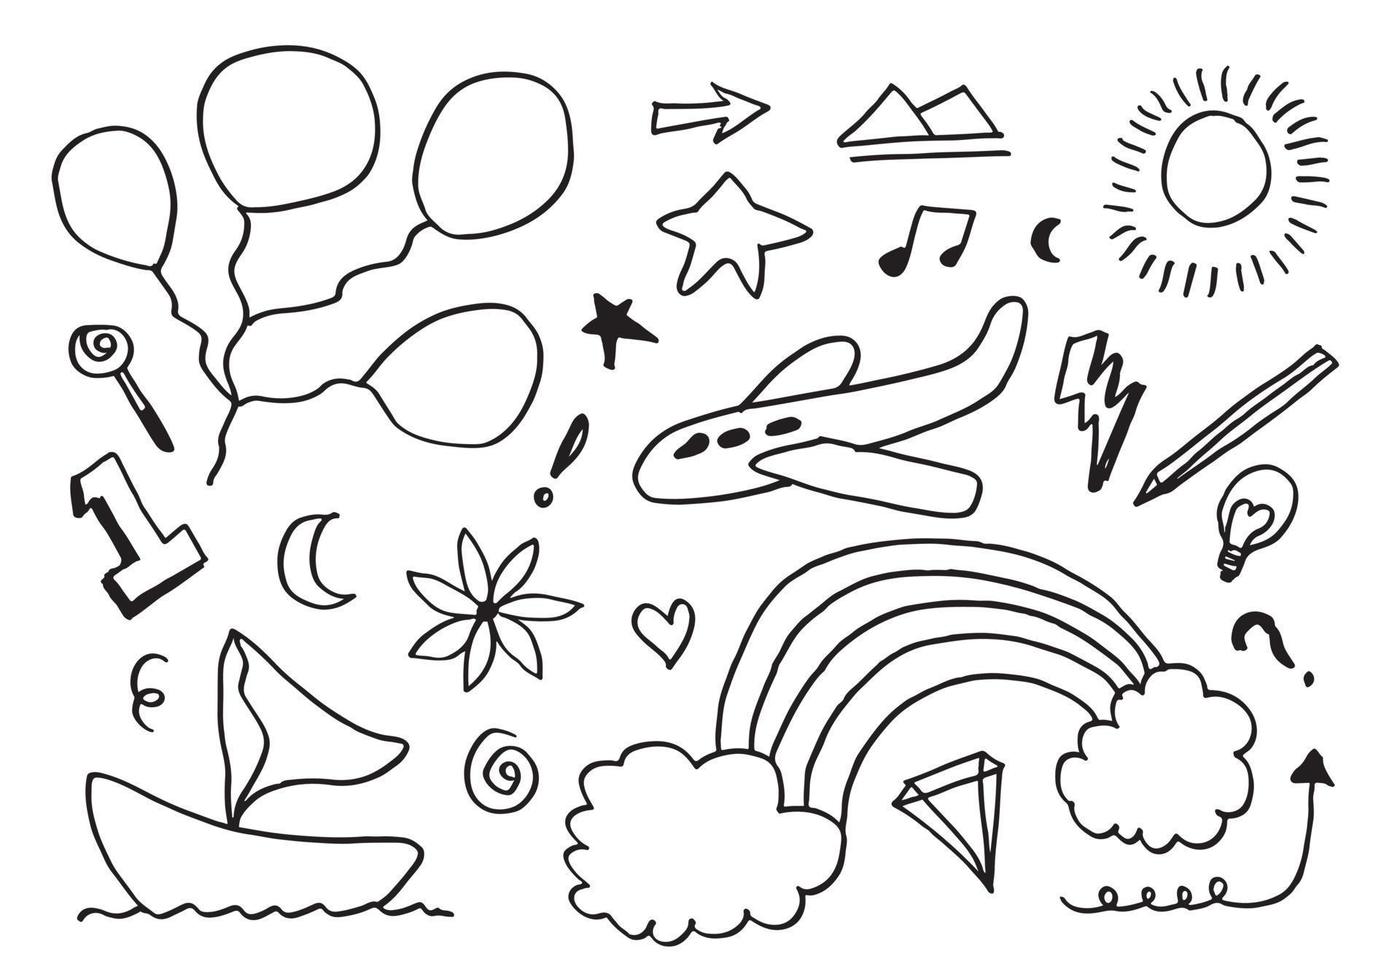 Hand drawn set of cute kids doodles.children drawings on white background. vector